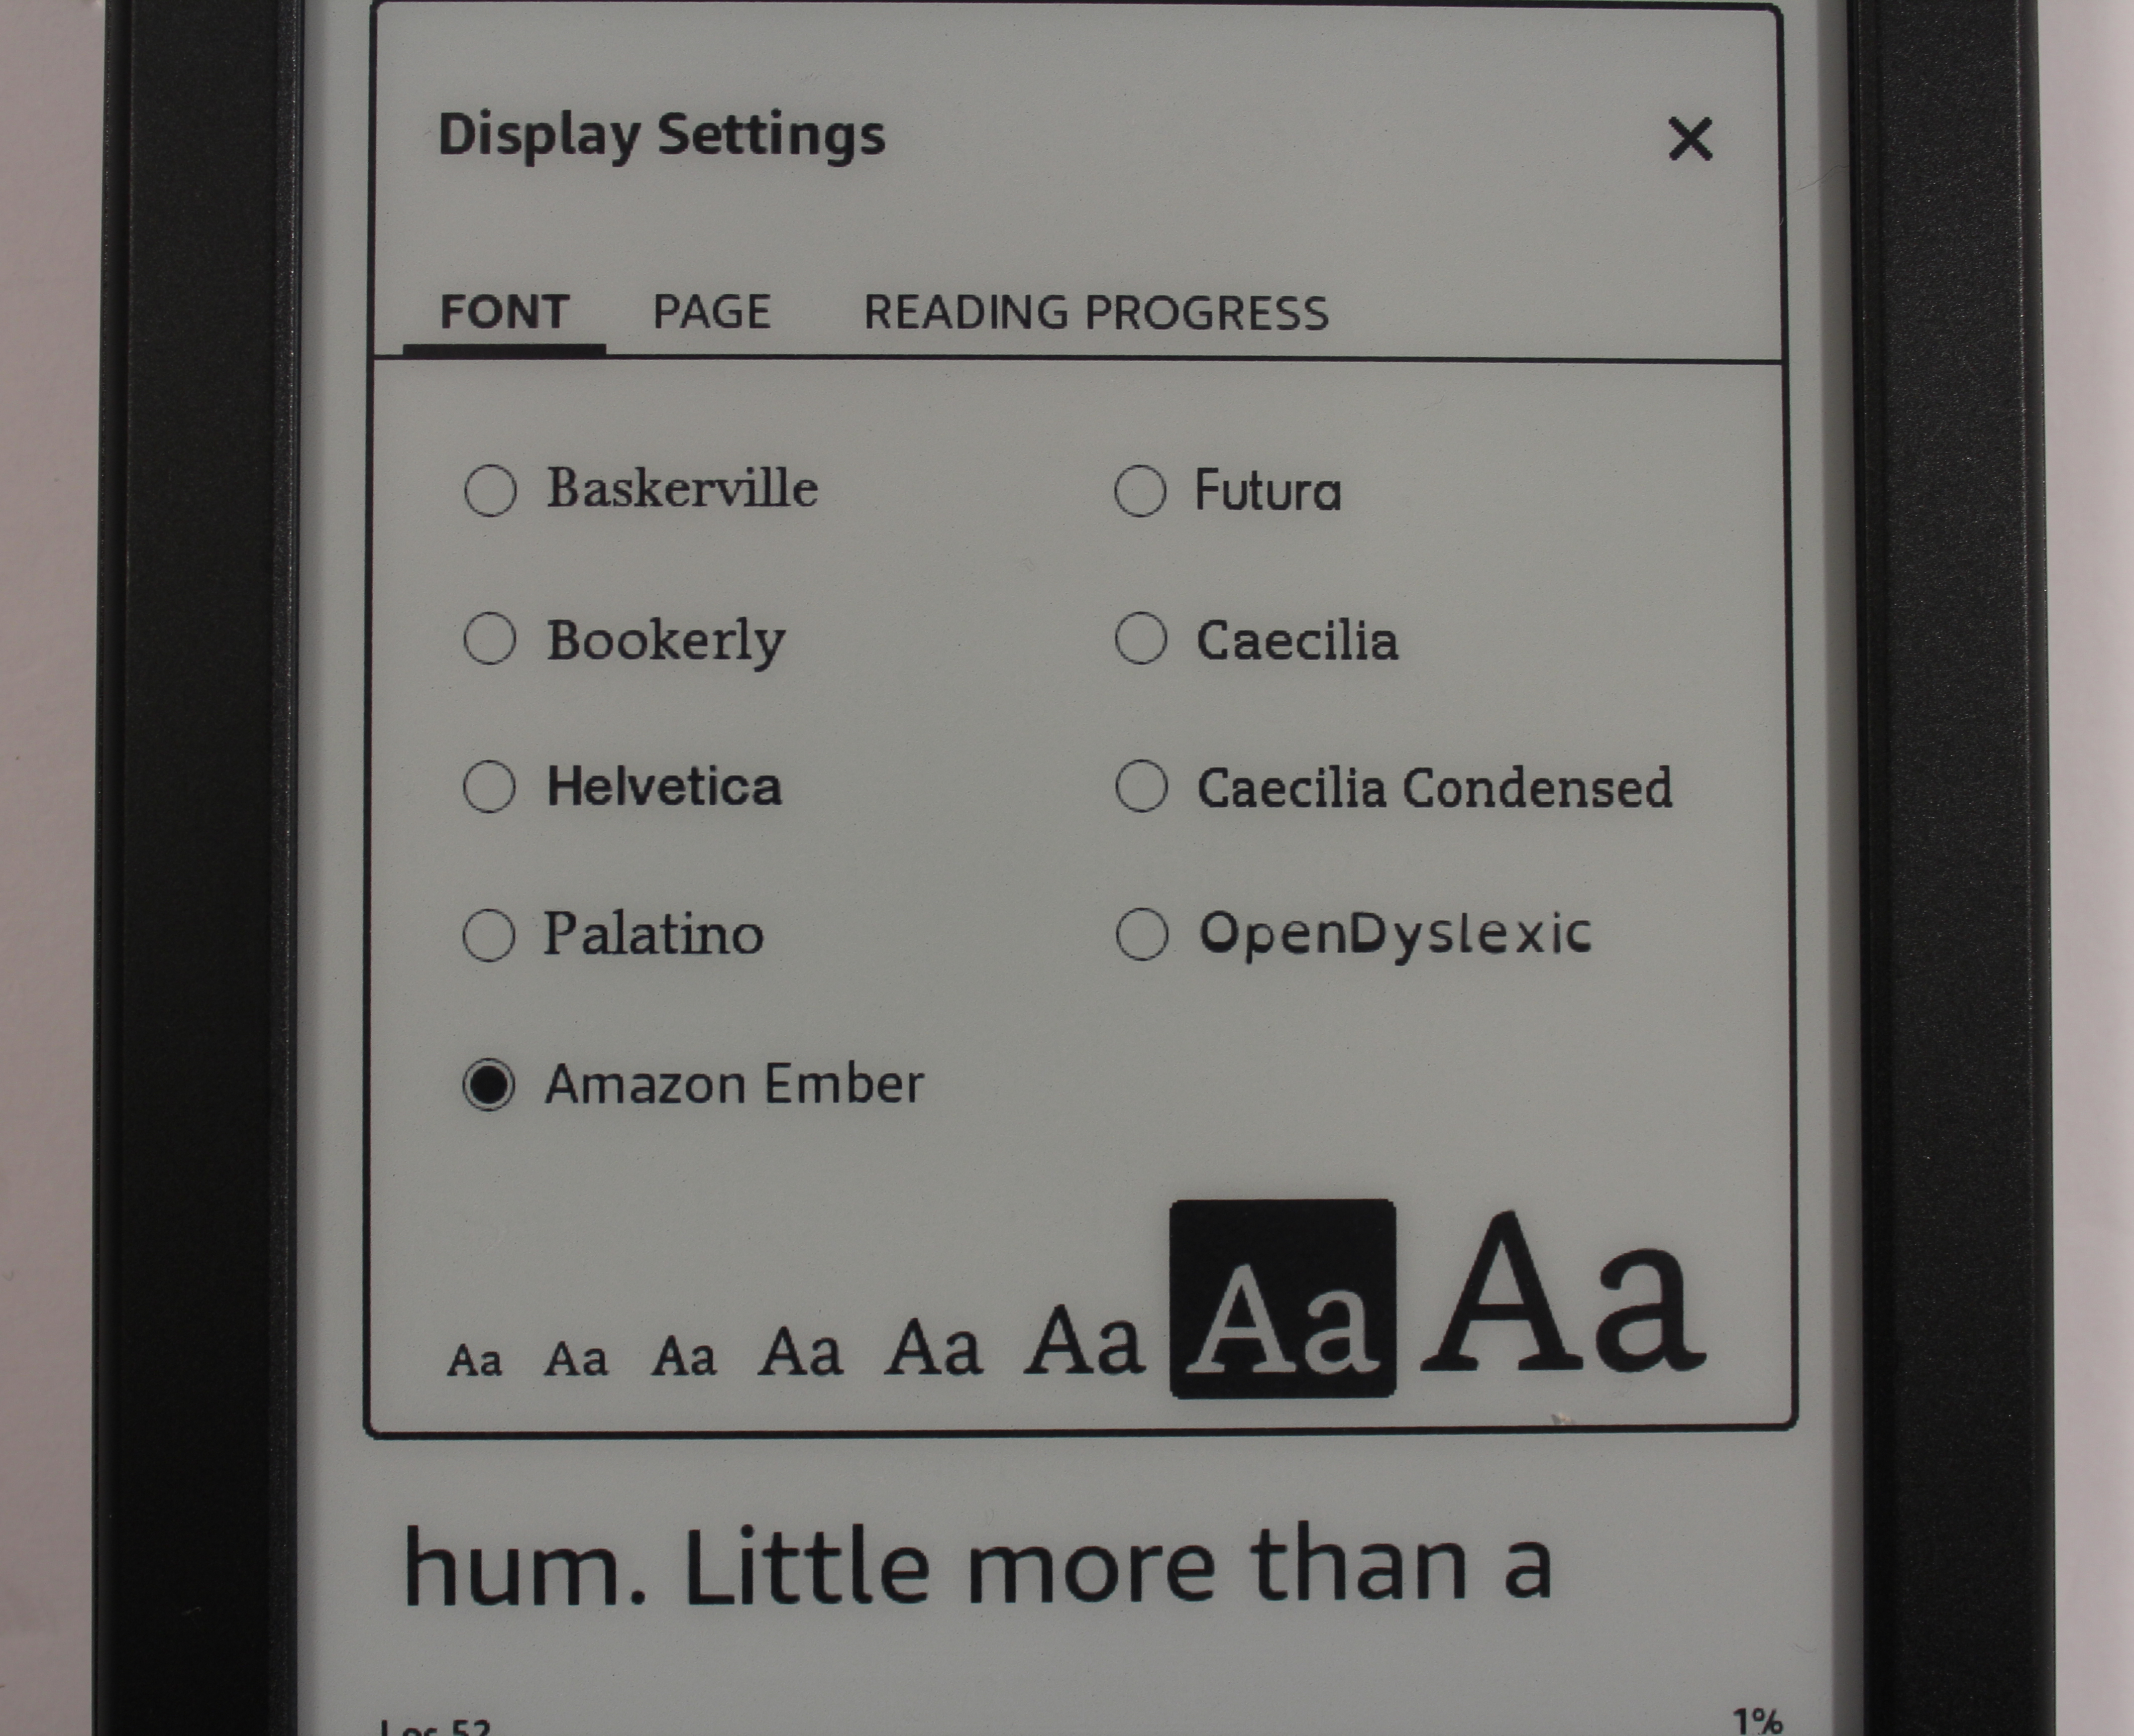 Kindle 8th Generation 2016 Review - Good e-Reader